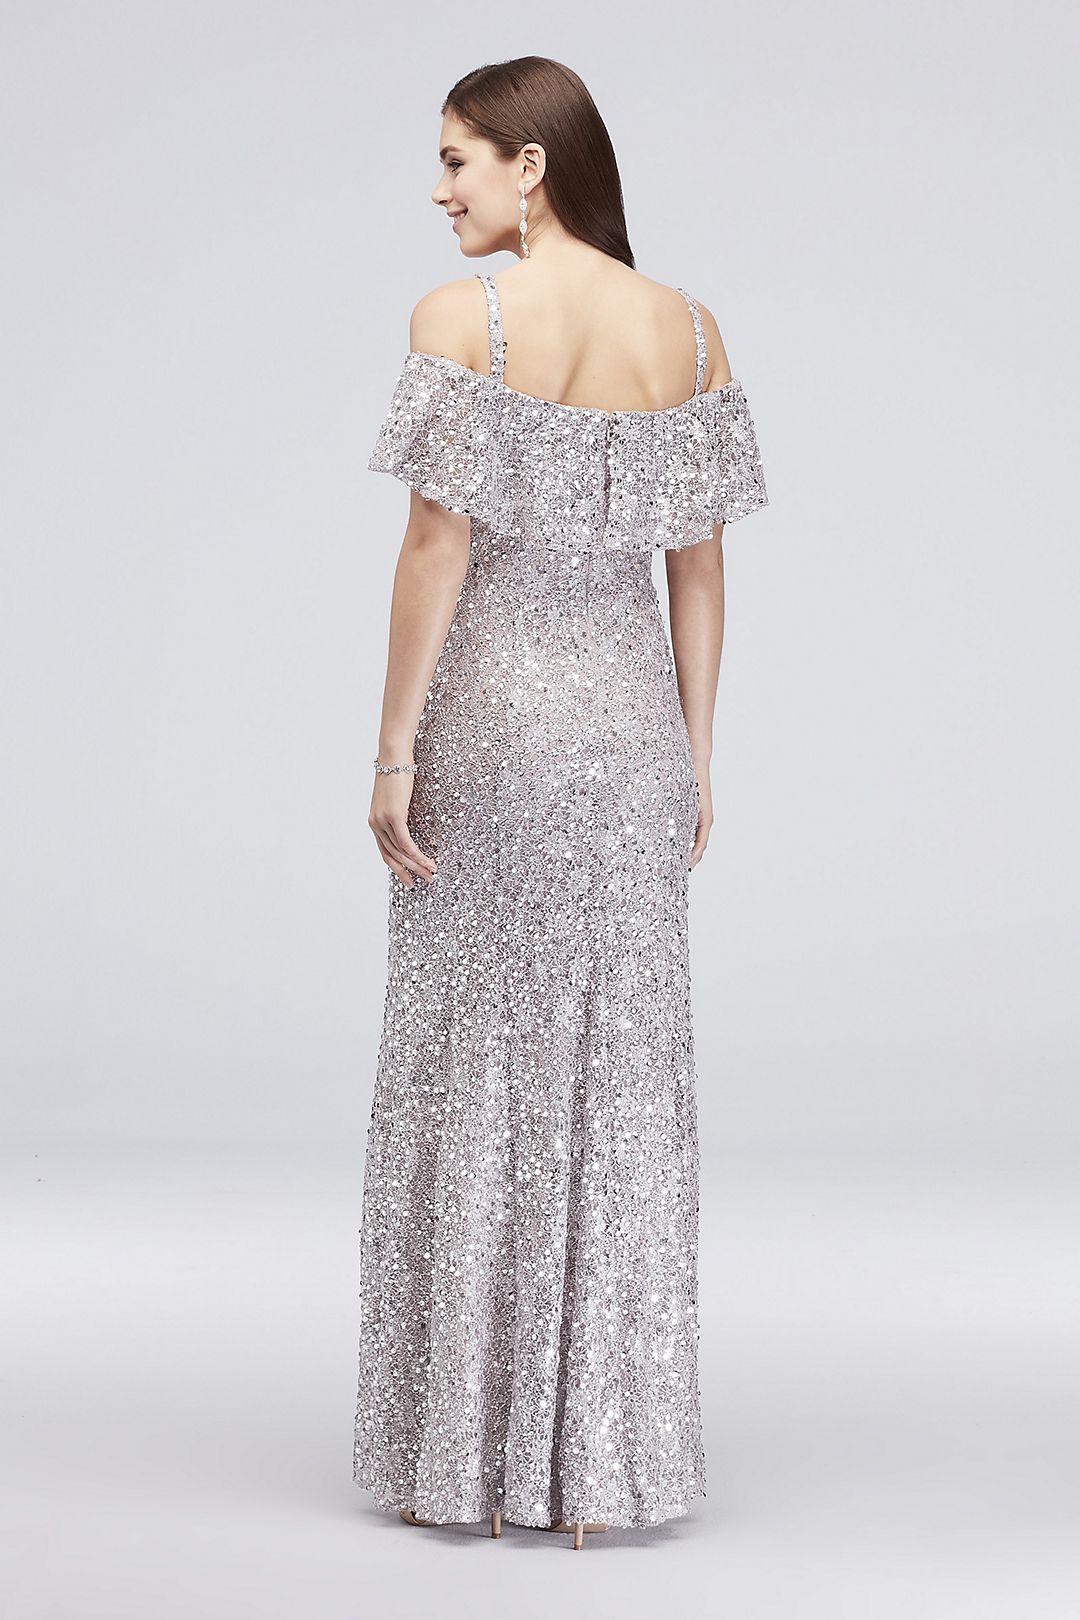 Sequin Cold-Shoulder Mermaid Dress with Flounce Image 2